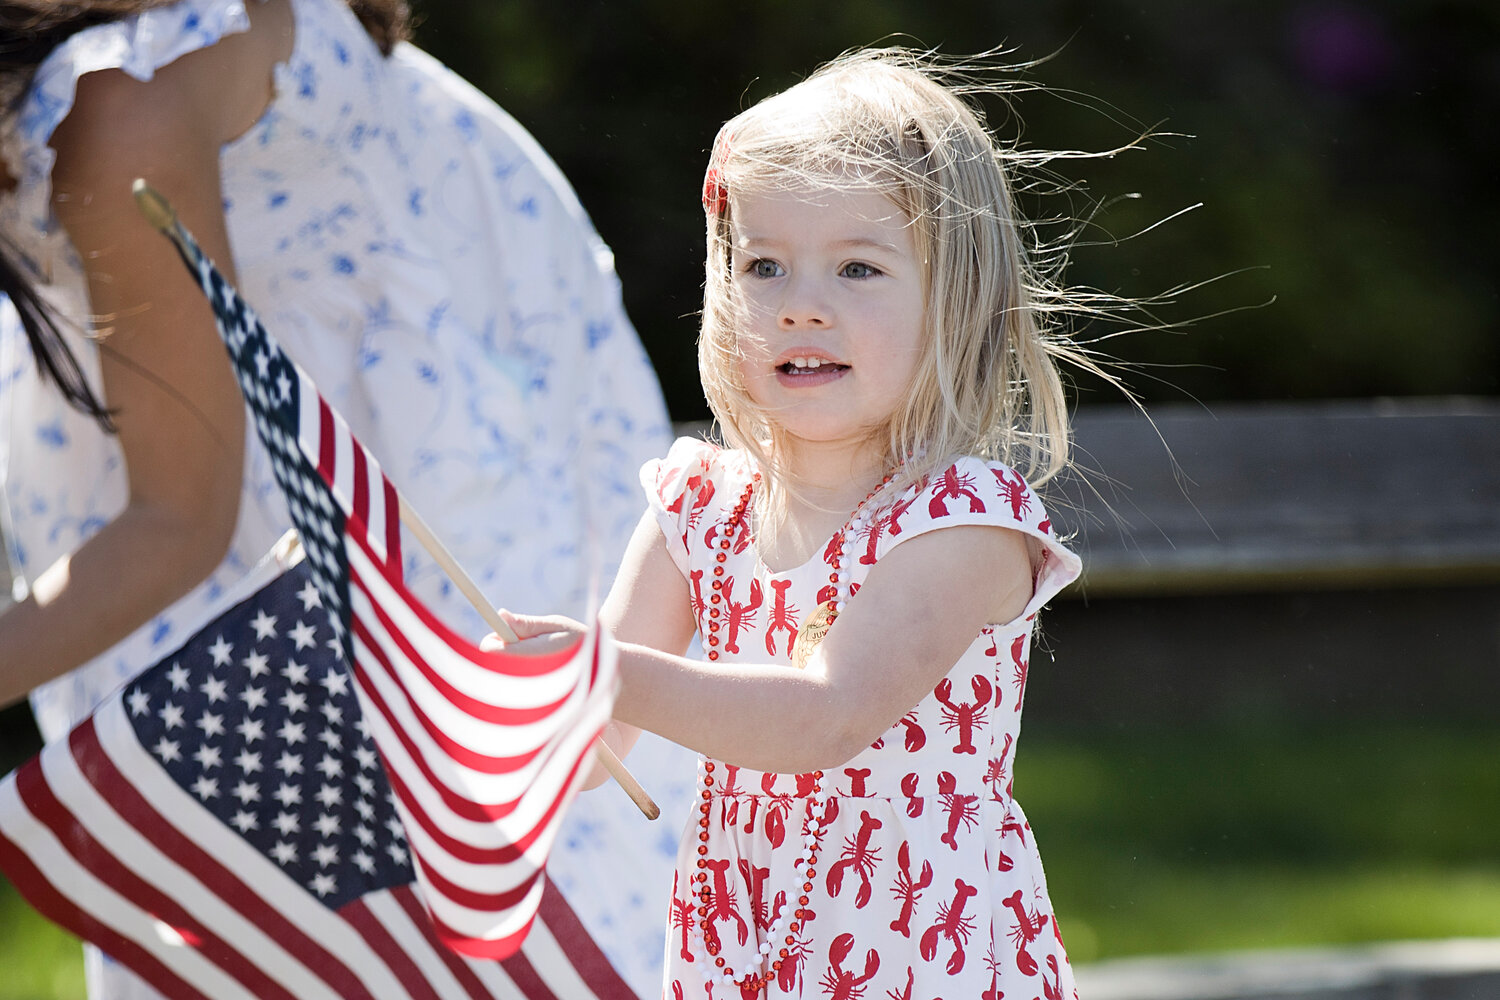 Eleanor Dolan waves a flag while watching Barrington's Memorial Day parade on Upland Way, Monday.